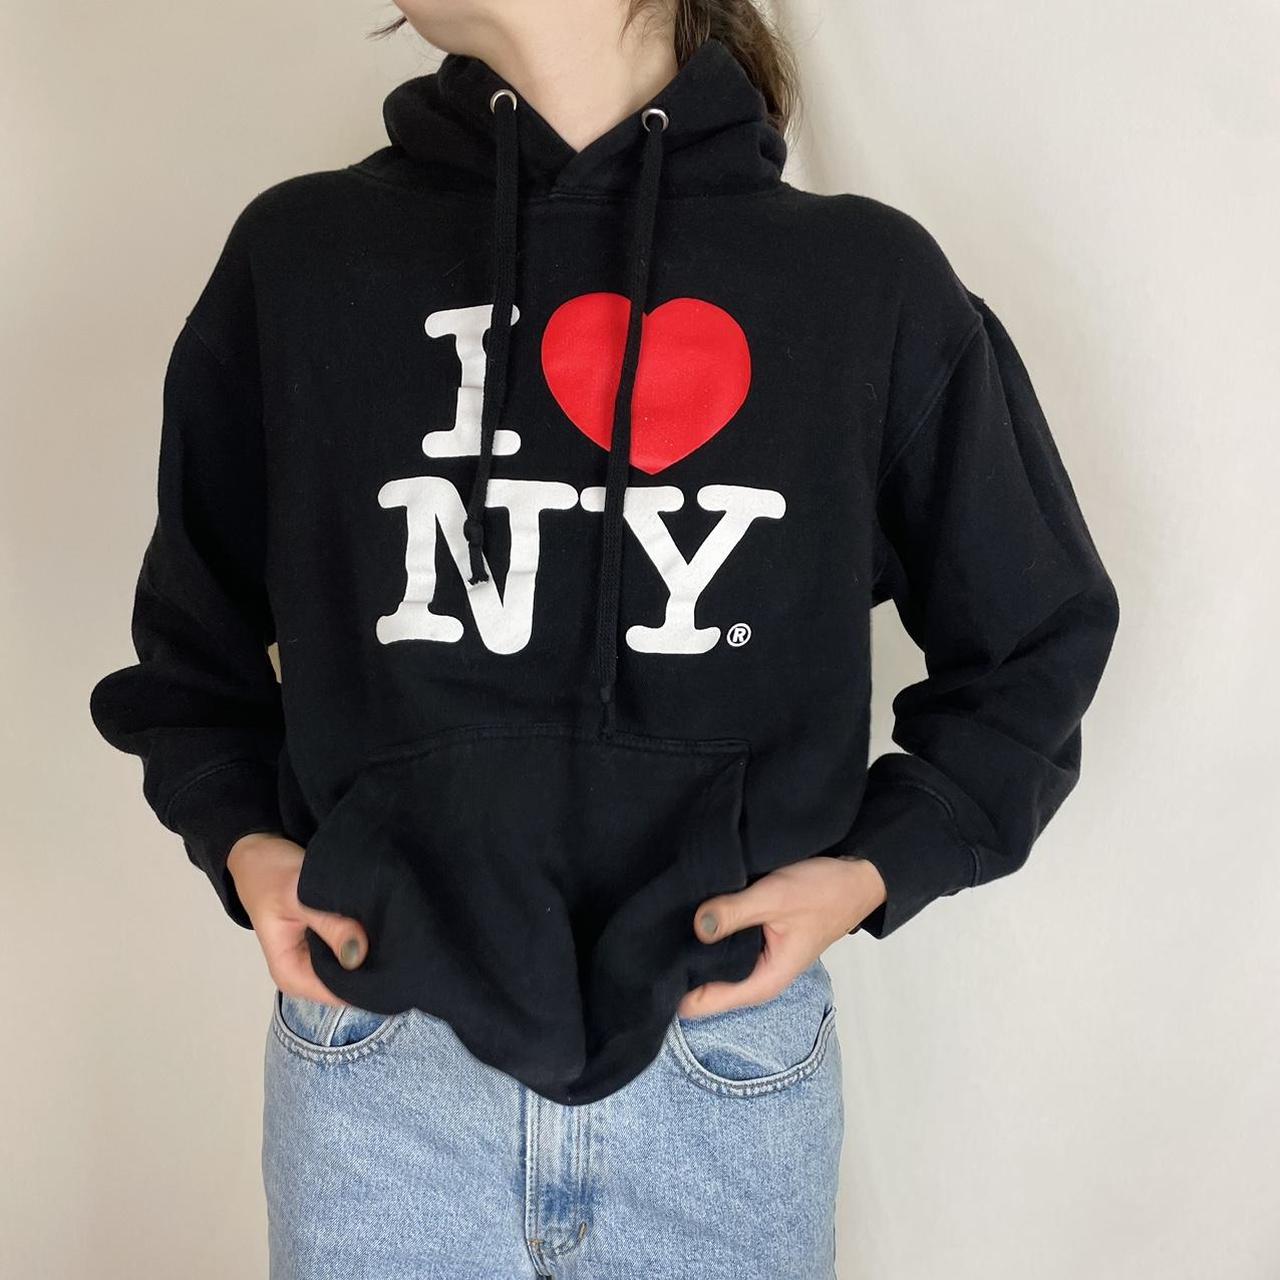 new york hoodie black and red